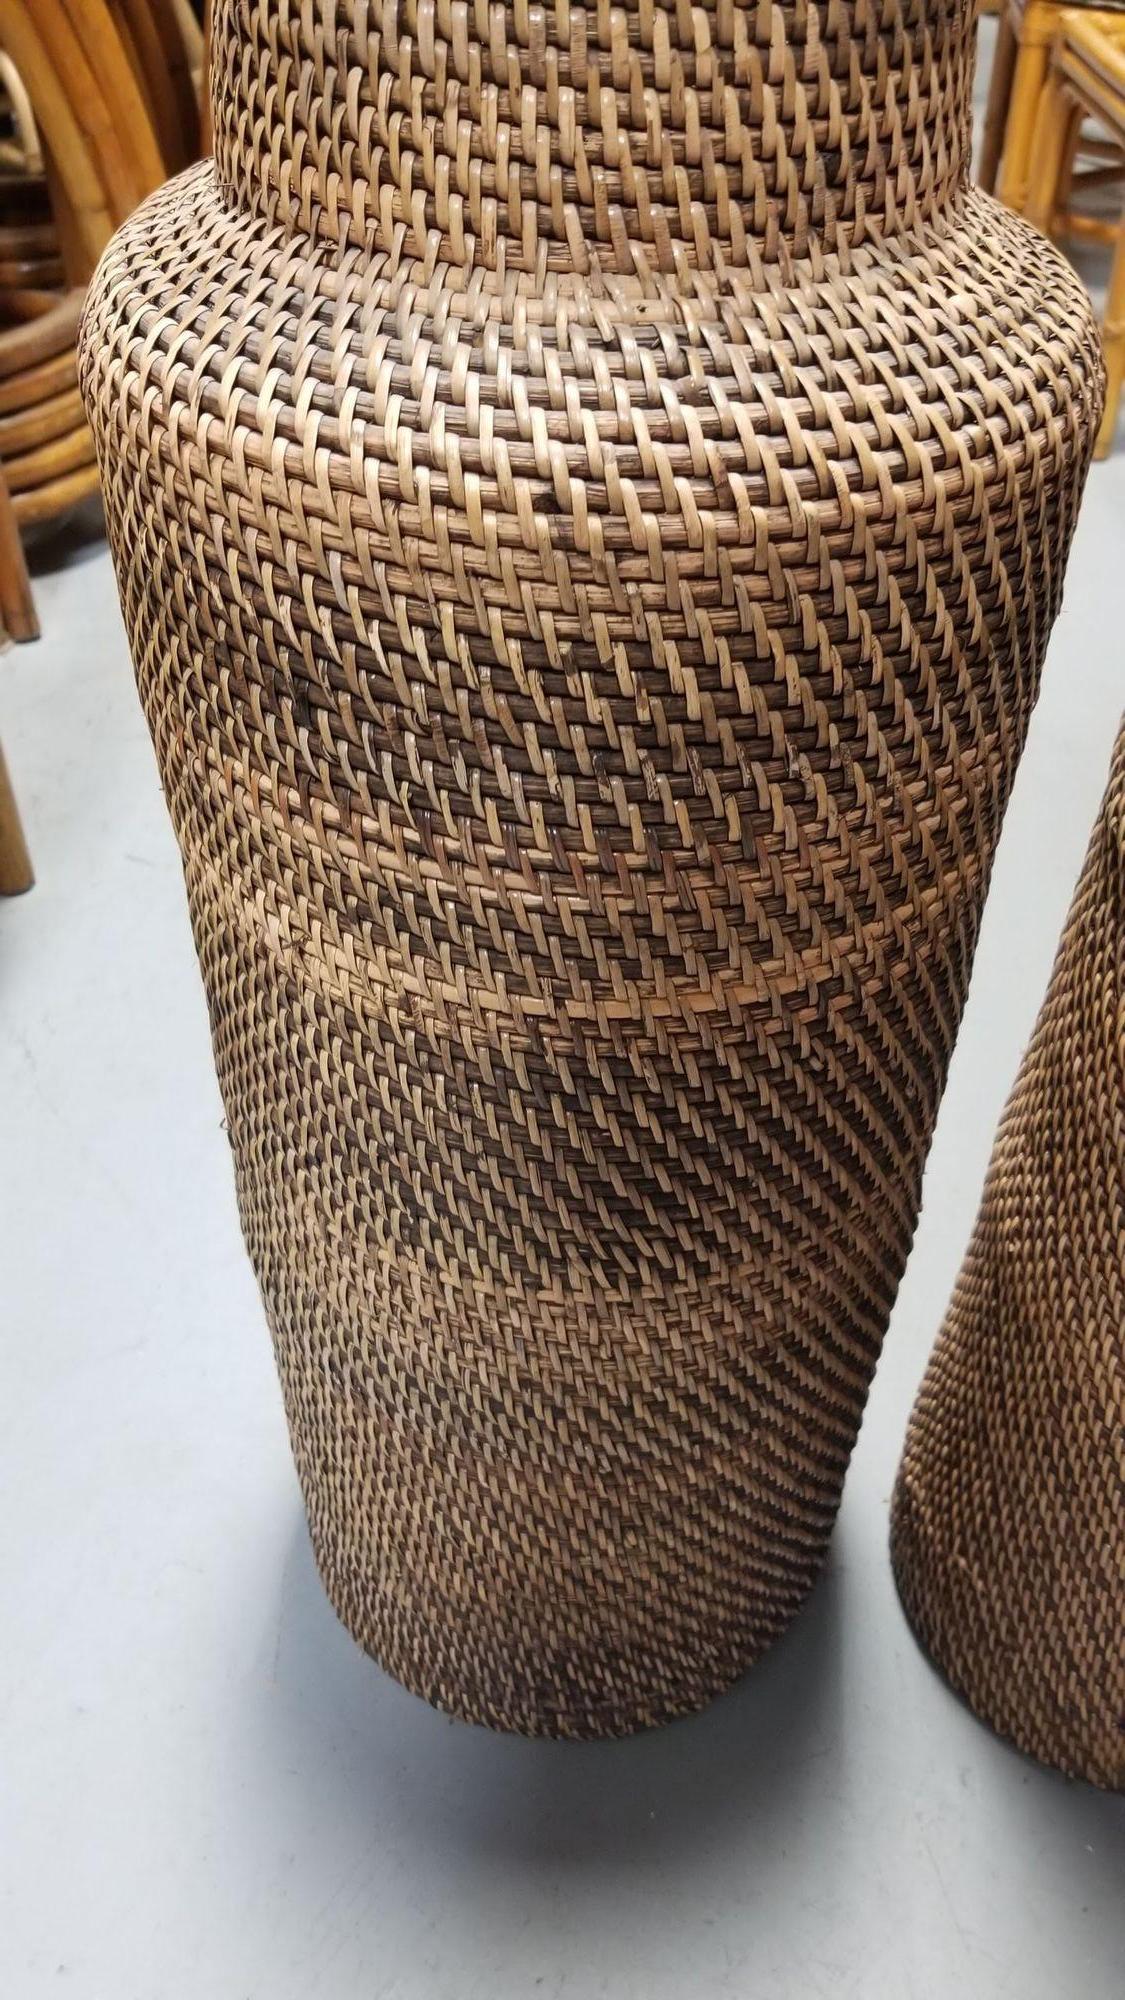 Restored Reed Rattan Wicker Decorative Vases Gabriella Crespi Styled - Pair of 2 For Sale 1